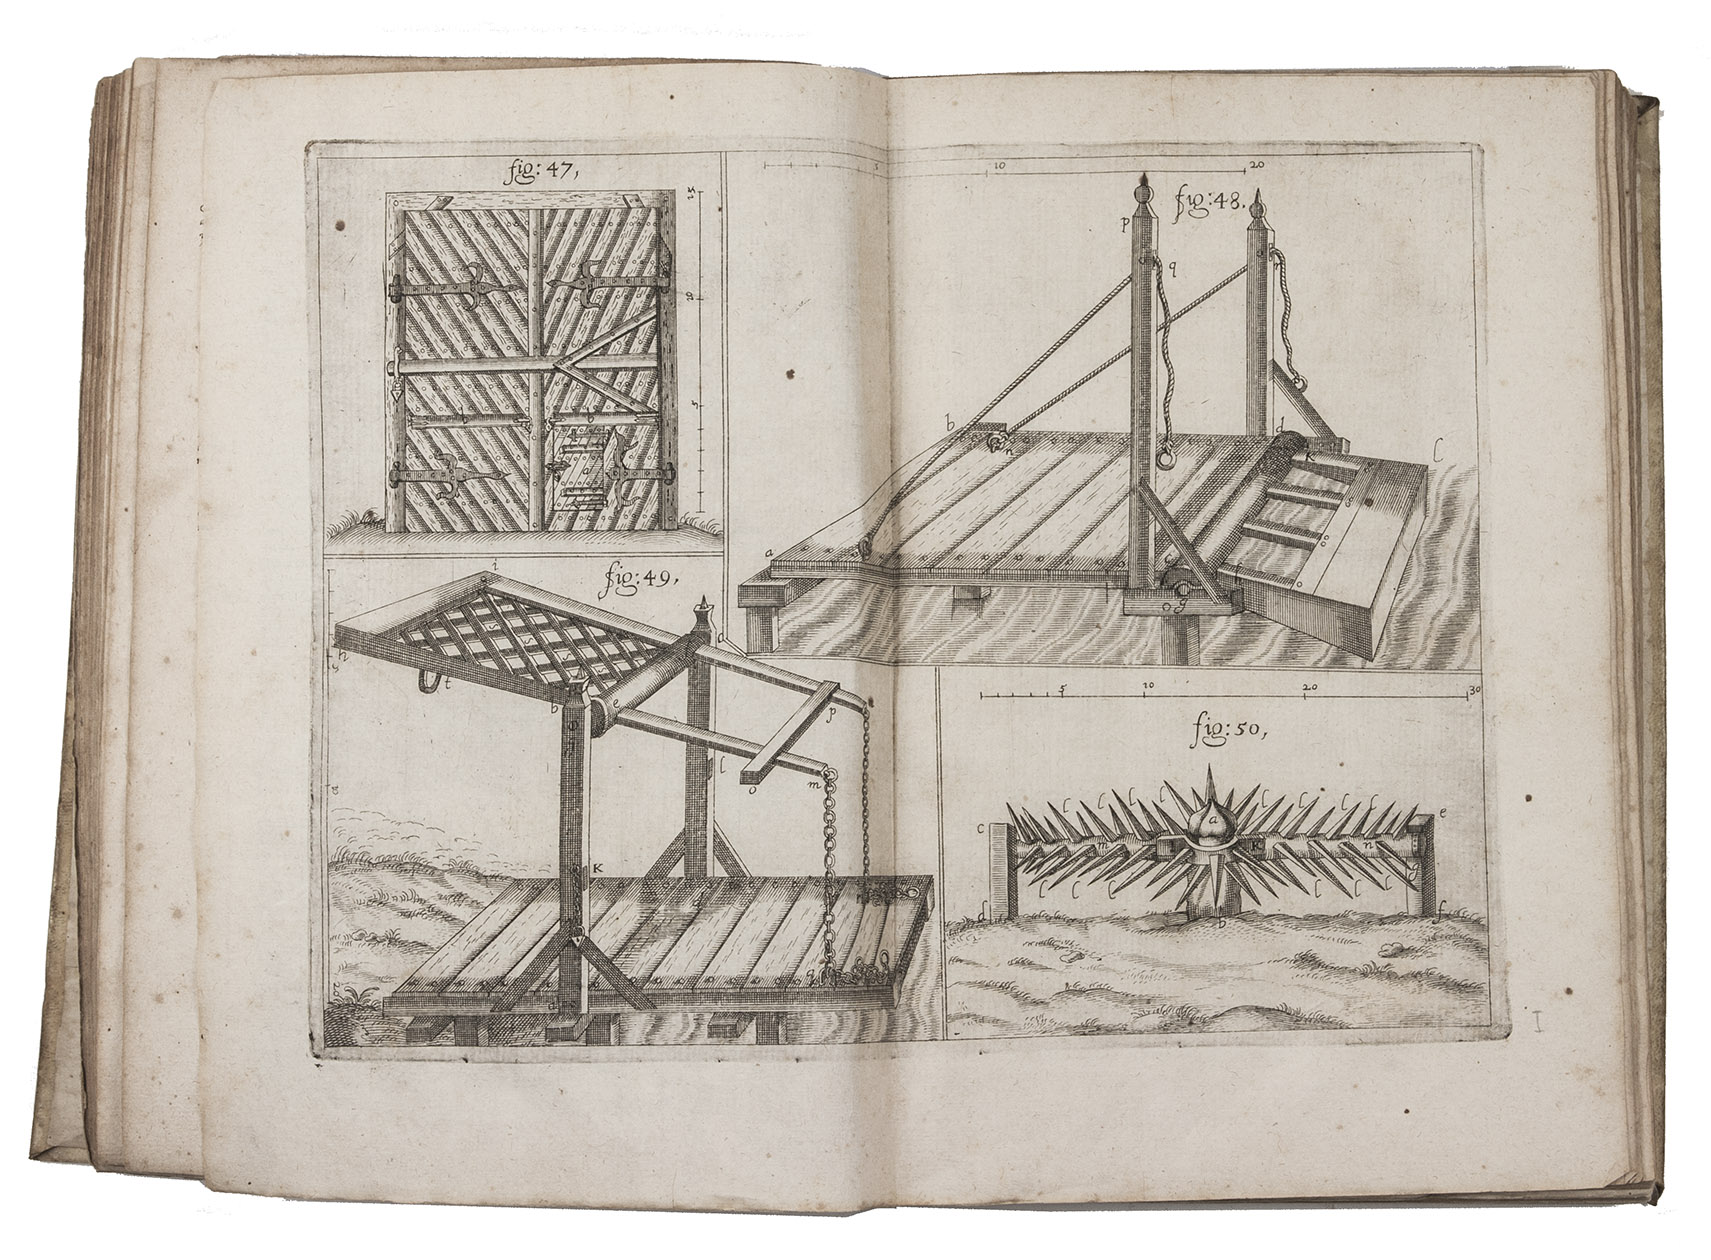 FREITAG, Adam. - L'architecture militaire ou la fortification nouvelle.Paris, Toussainct Quinet, 1640. Folio. With an engraved title-page, 35 double-page engraved illustration plates containing 185 numbered figures, and 8 double-page letterpress tables. Contemporary vellum.